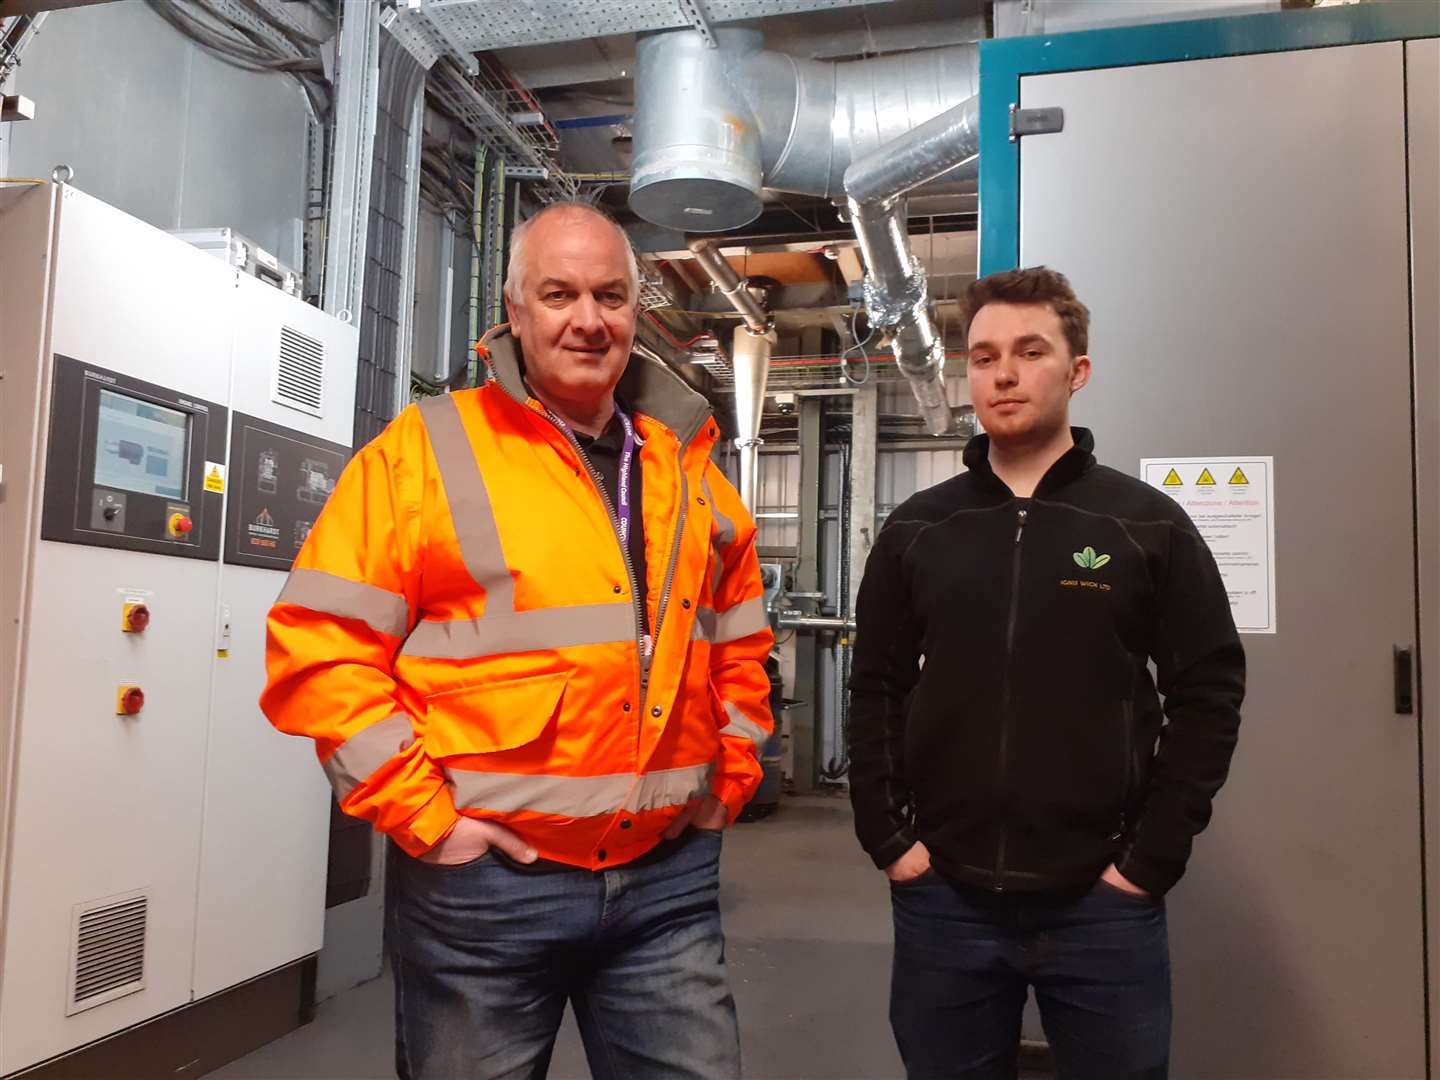 Councilor Raymond Bremner (left) and Harris Gilmore, director of Ignis Wick Ltd, inside the biomass plant.